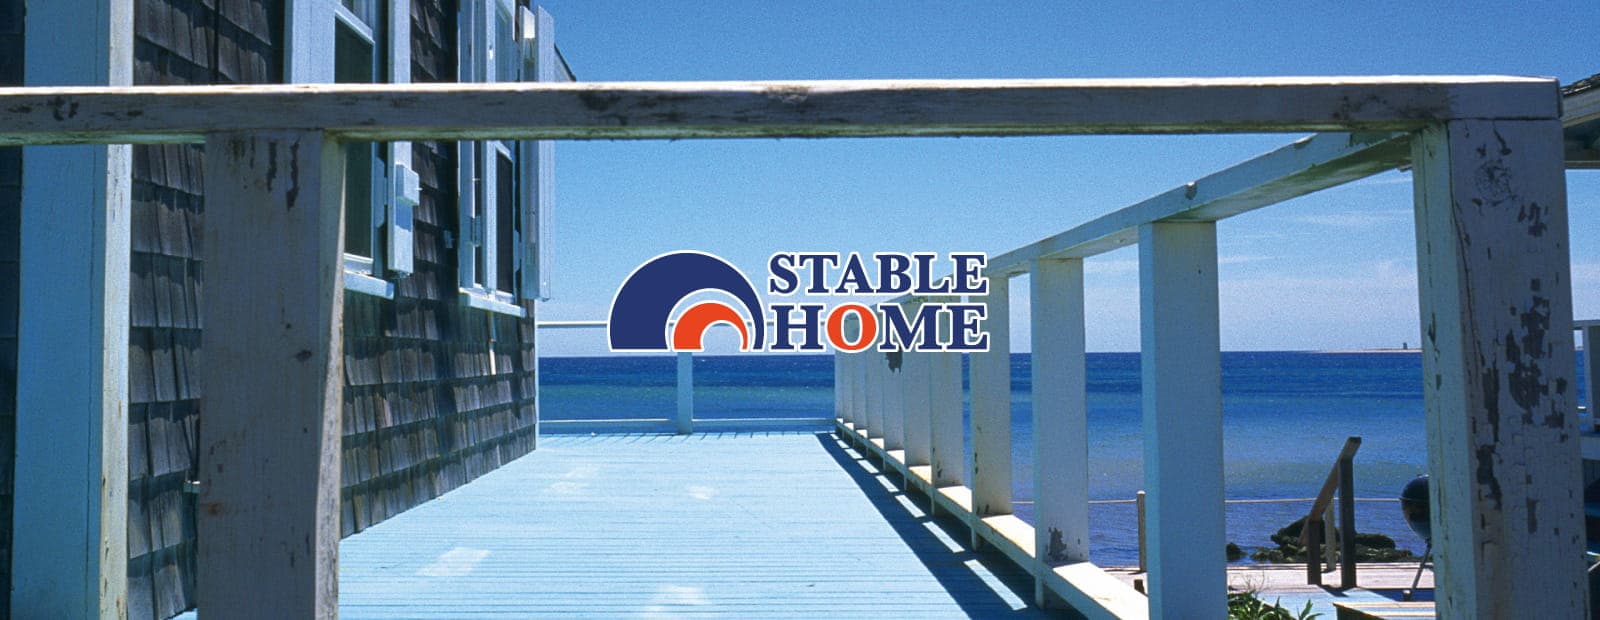 STABLE HOME